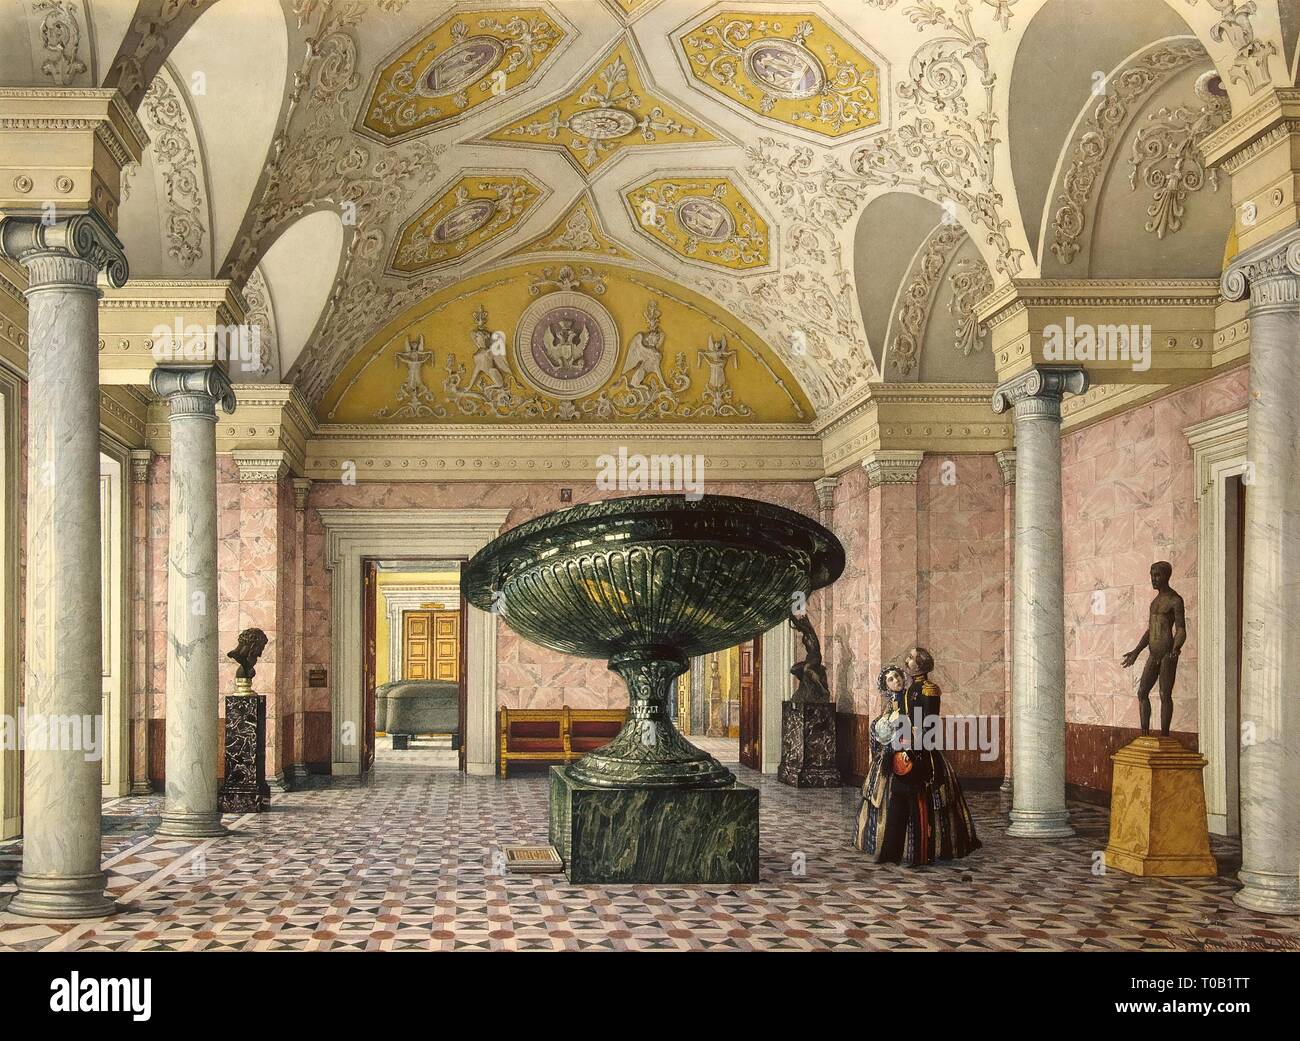 'Interiors of the New Hermitage. The Room Showing the Kolyvan Vase'. Russia, 1858. Dimensions: 29,4x40 cm. Museum: State Hermitage, St. Petersburg. Author: Konstantin Ukhtomsky. Stock Photo